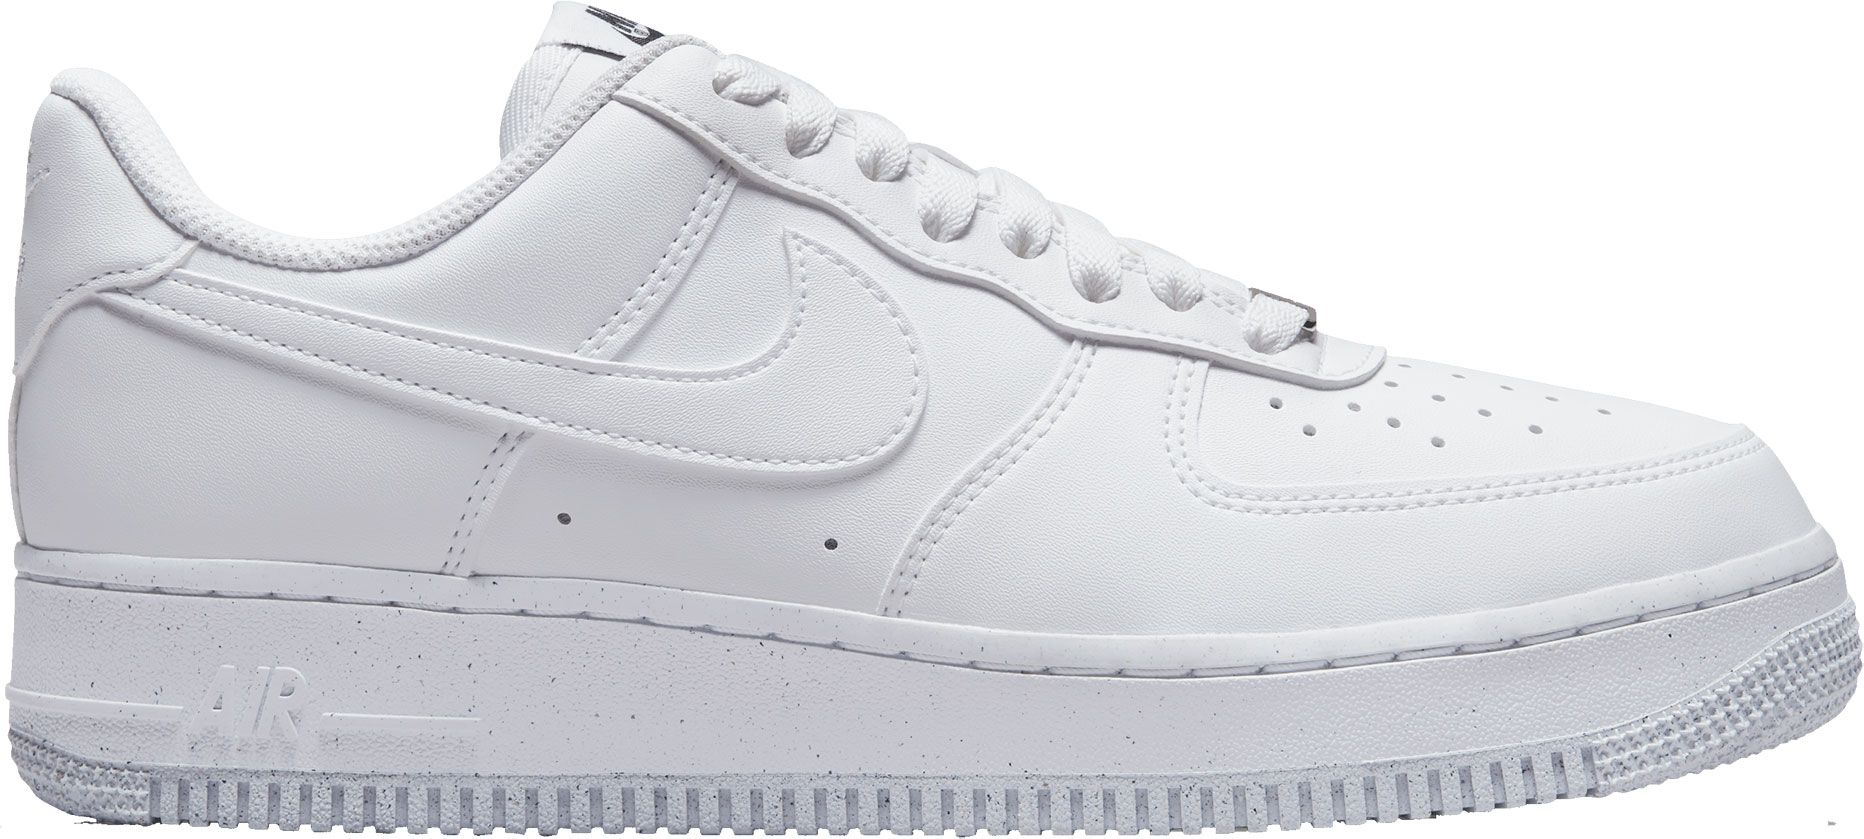 what stores have air force ones in stock